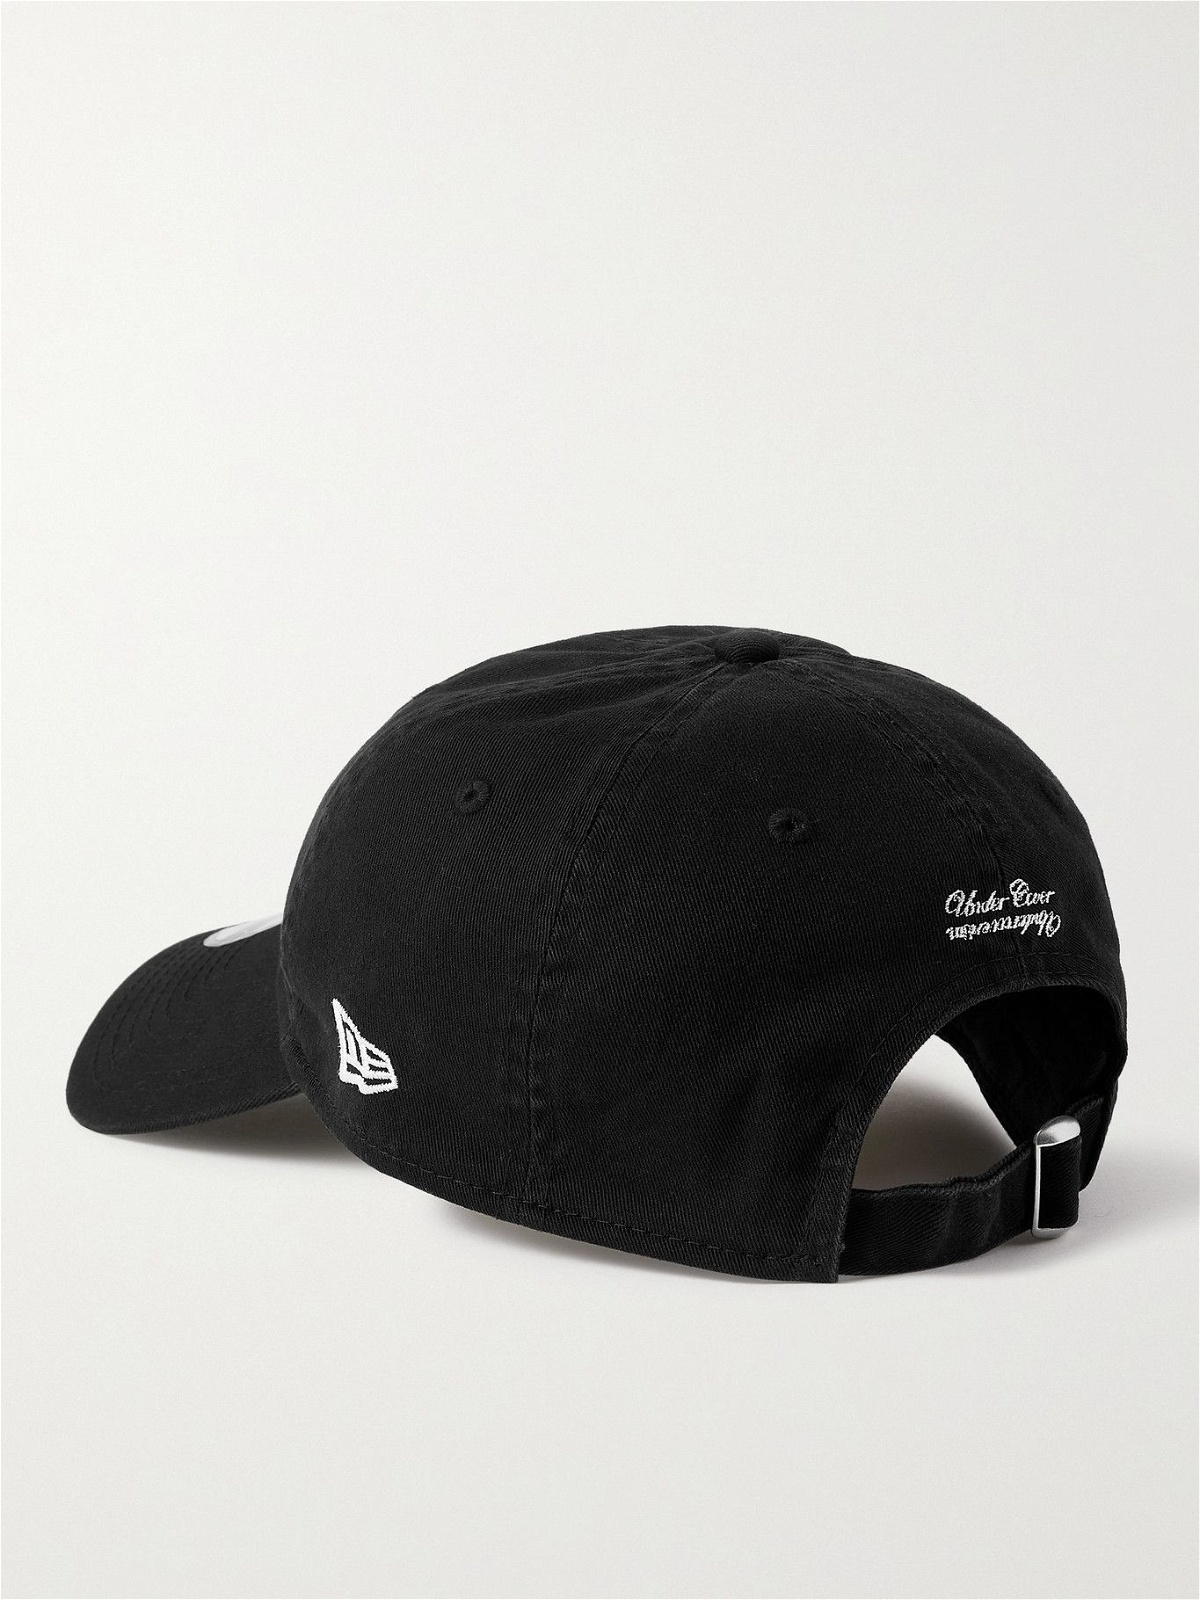 UNDERCOVER MADSTORE - New Era MADSTORE Embroidered Cotton